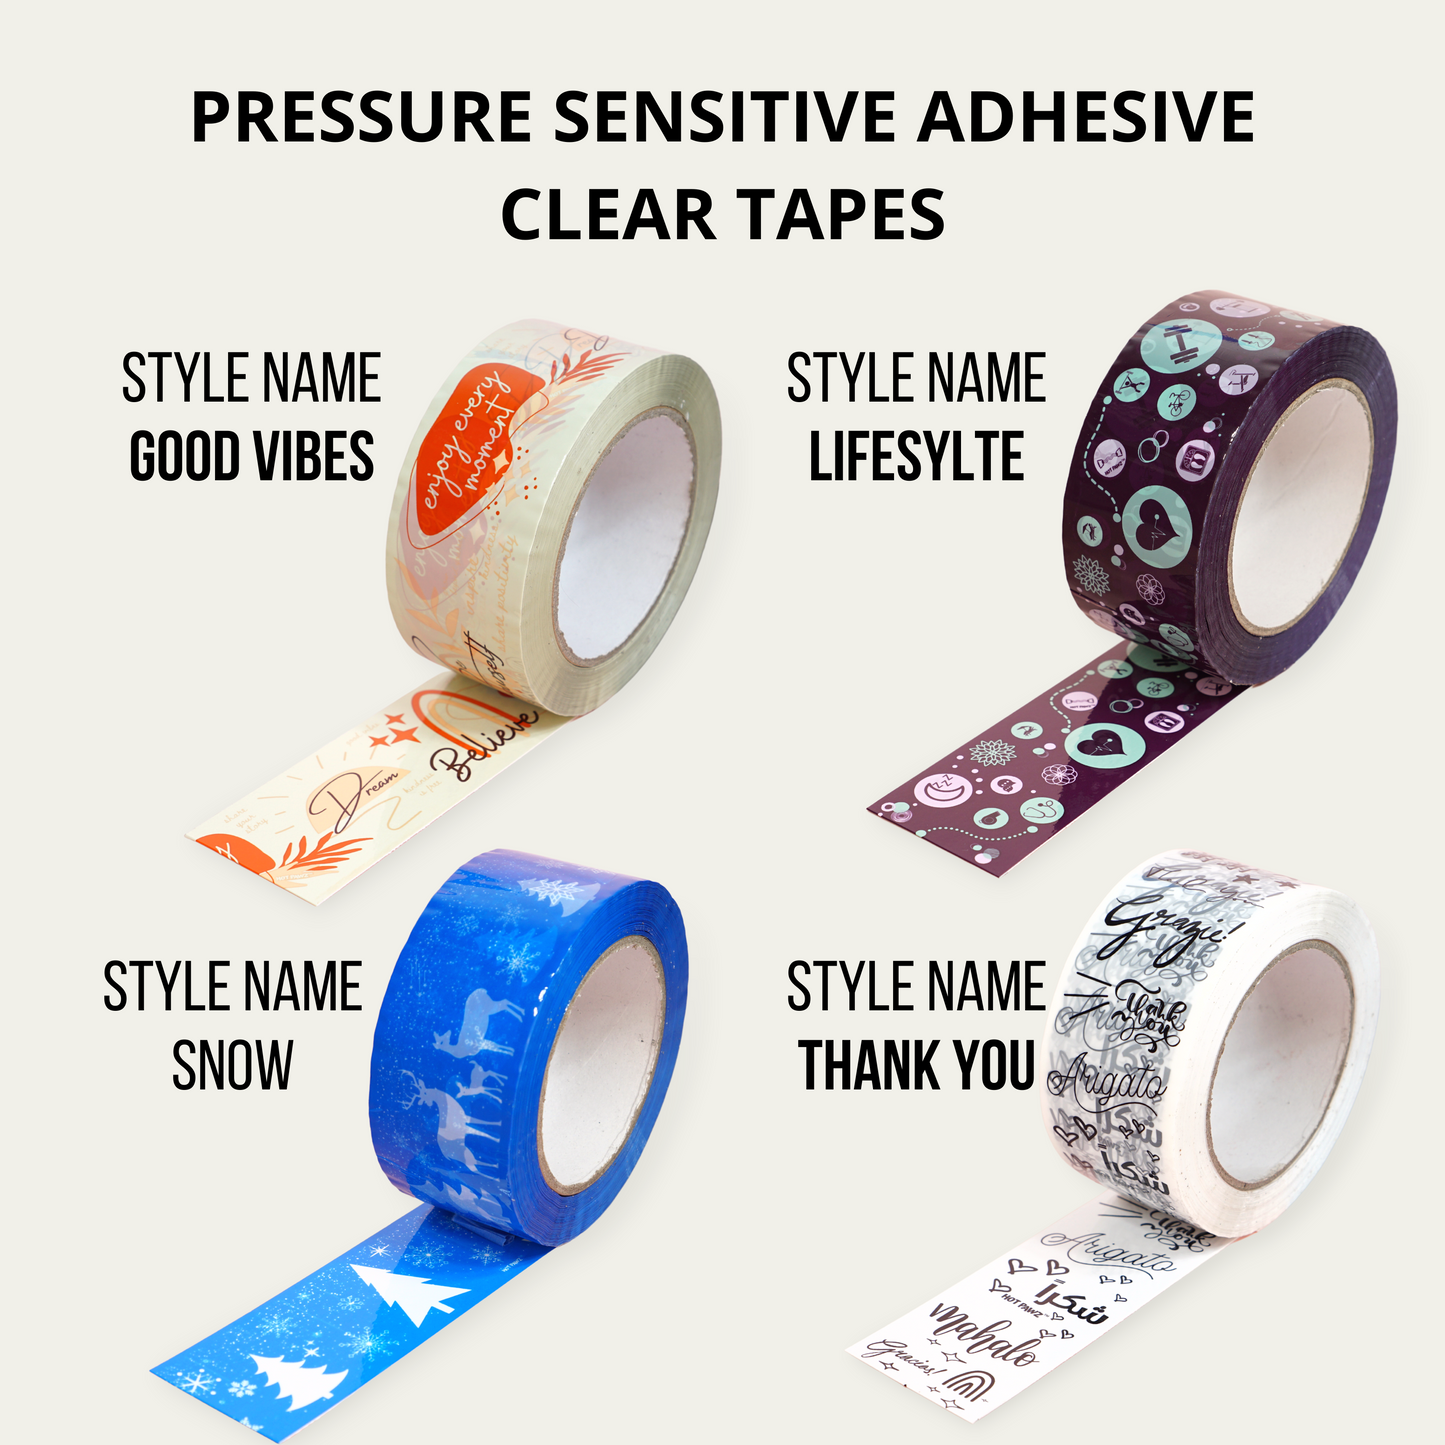 Hot Pawz Decorative Packing Tape Packaging Tape Heavy-duty Tape